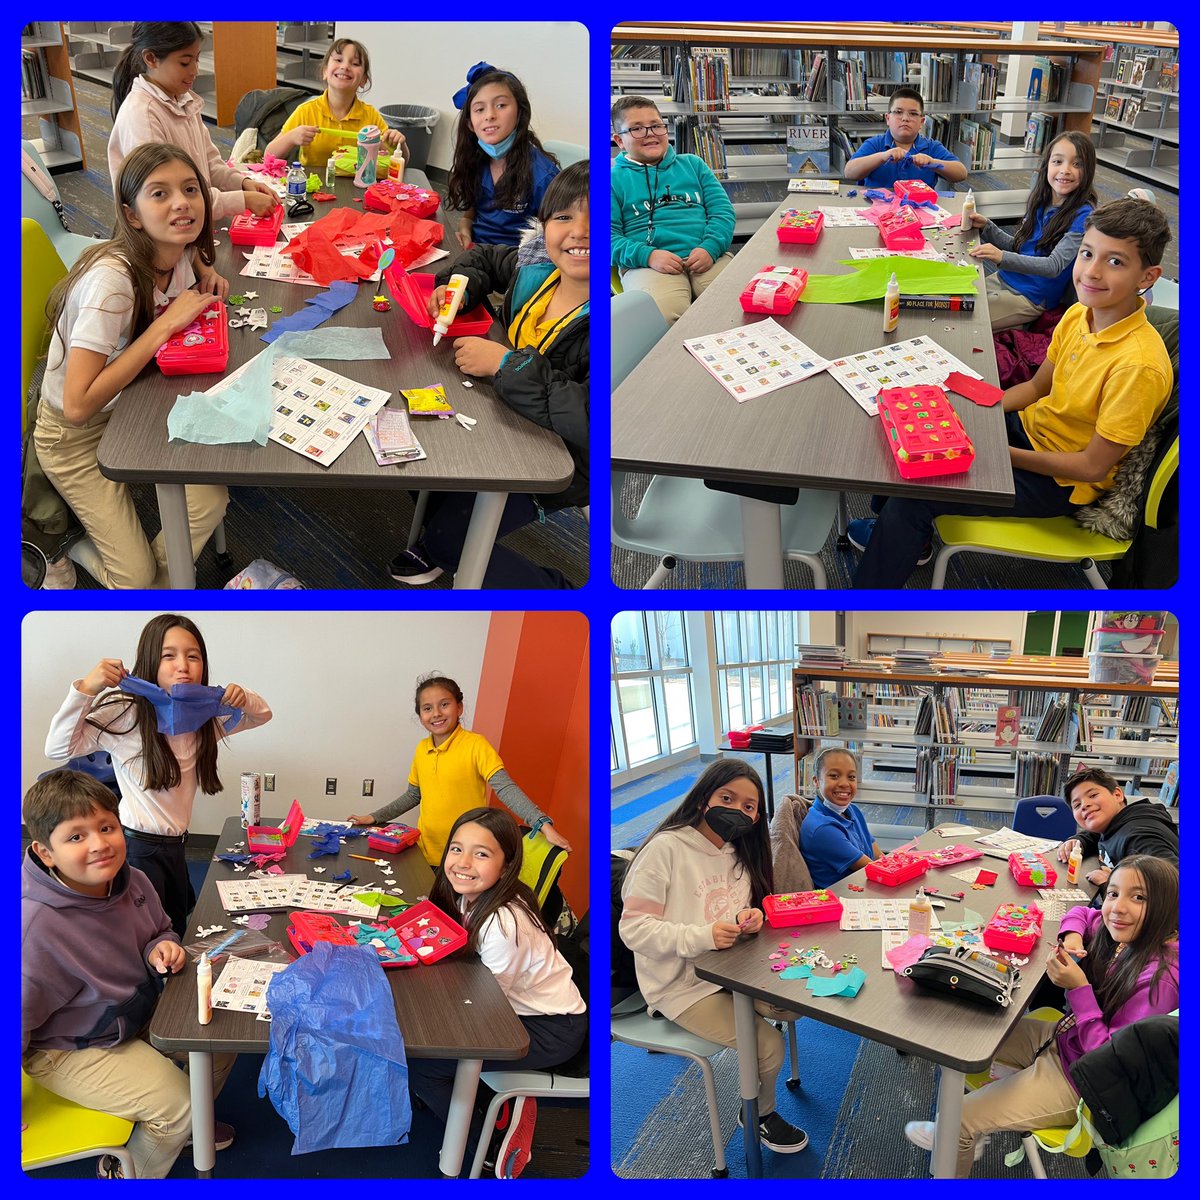 BNE Bluebonnet Reading Club working on Keepsake box after reading The One Thing You’d Save by Linda Sue Park.  What would you save?  @BNarbuth_ES @LOHara_BNES @SMorales_BNES @Sparks_Interest #LibrarianBrags